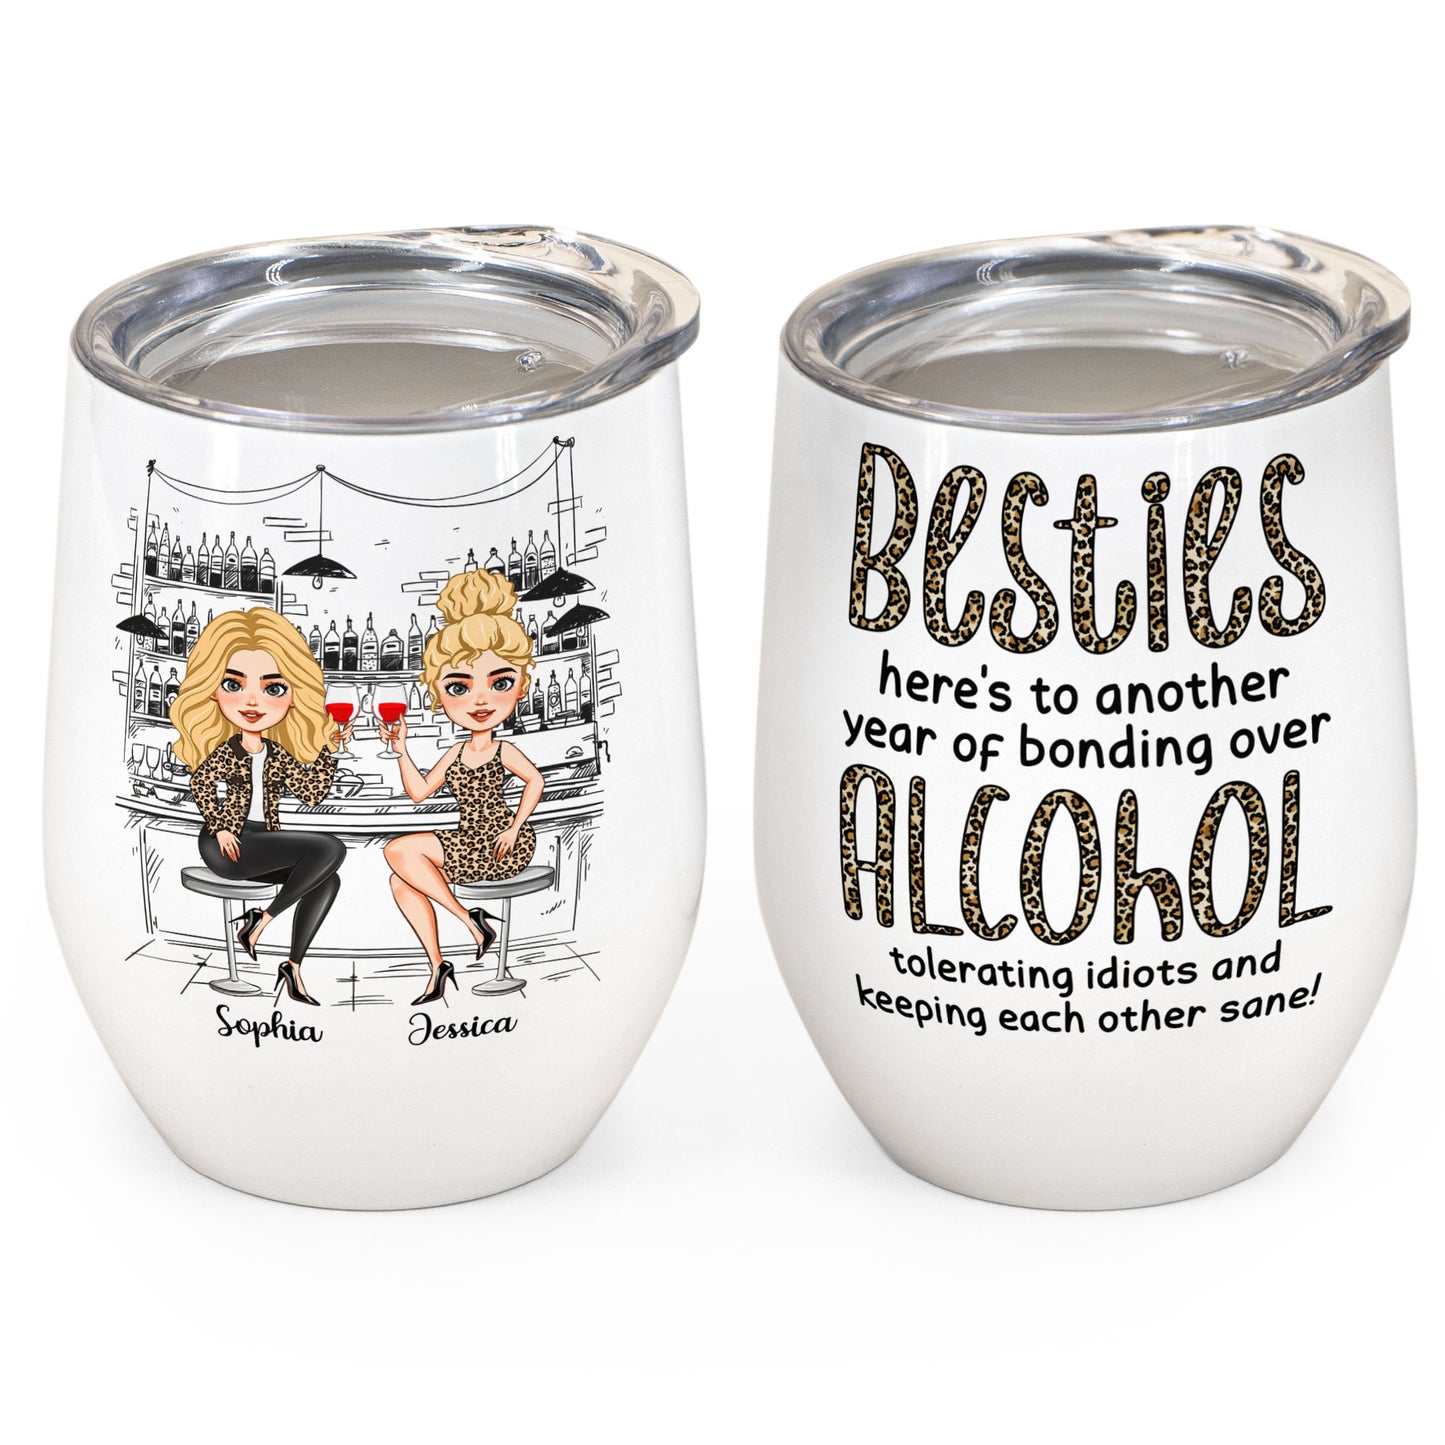 Alcohol Tolerating, Bonding Over, Keeping Each Other Sane - Personalized Wine Tumbler - Birthday Gift For Besties, Soul Sisters, Sistas, BFF, Friends - Drinking Friends